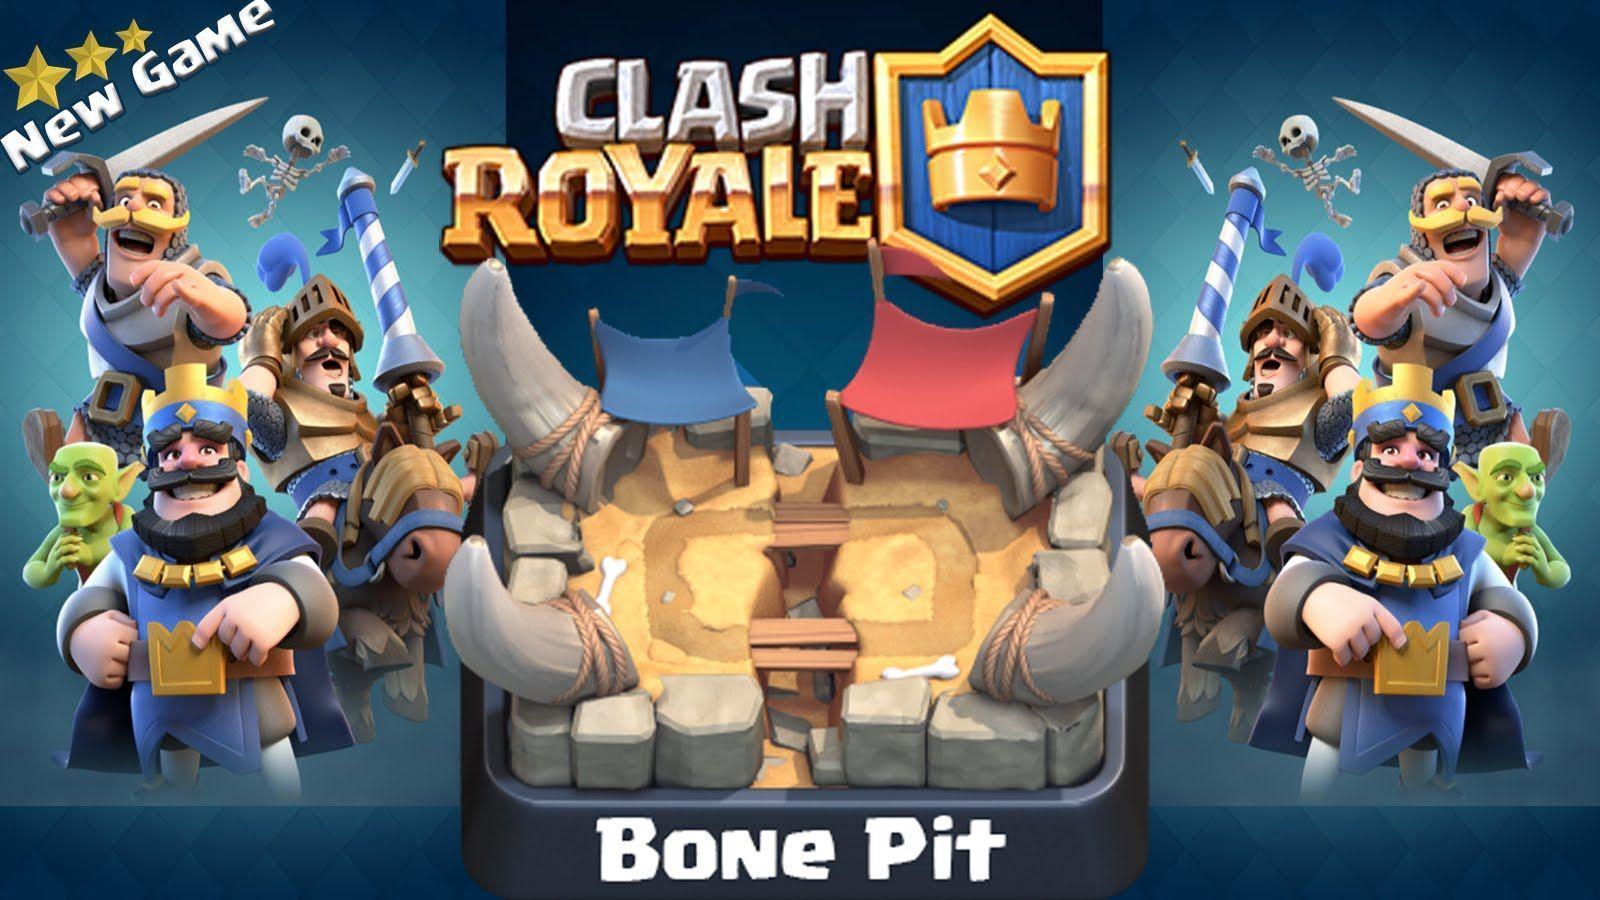 Clash Royale and GamePlay